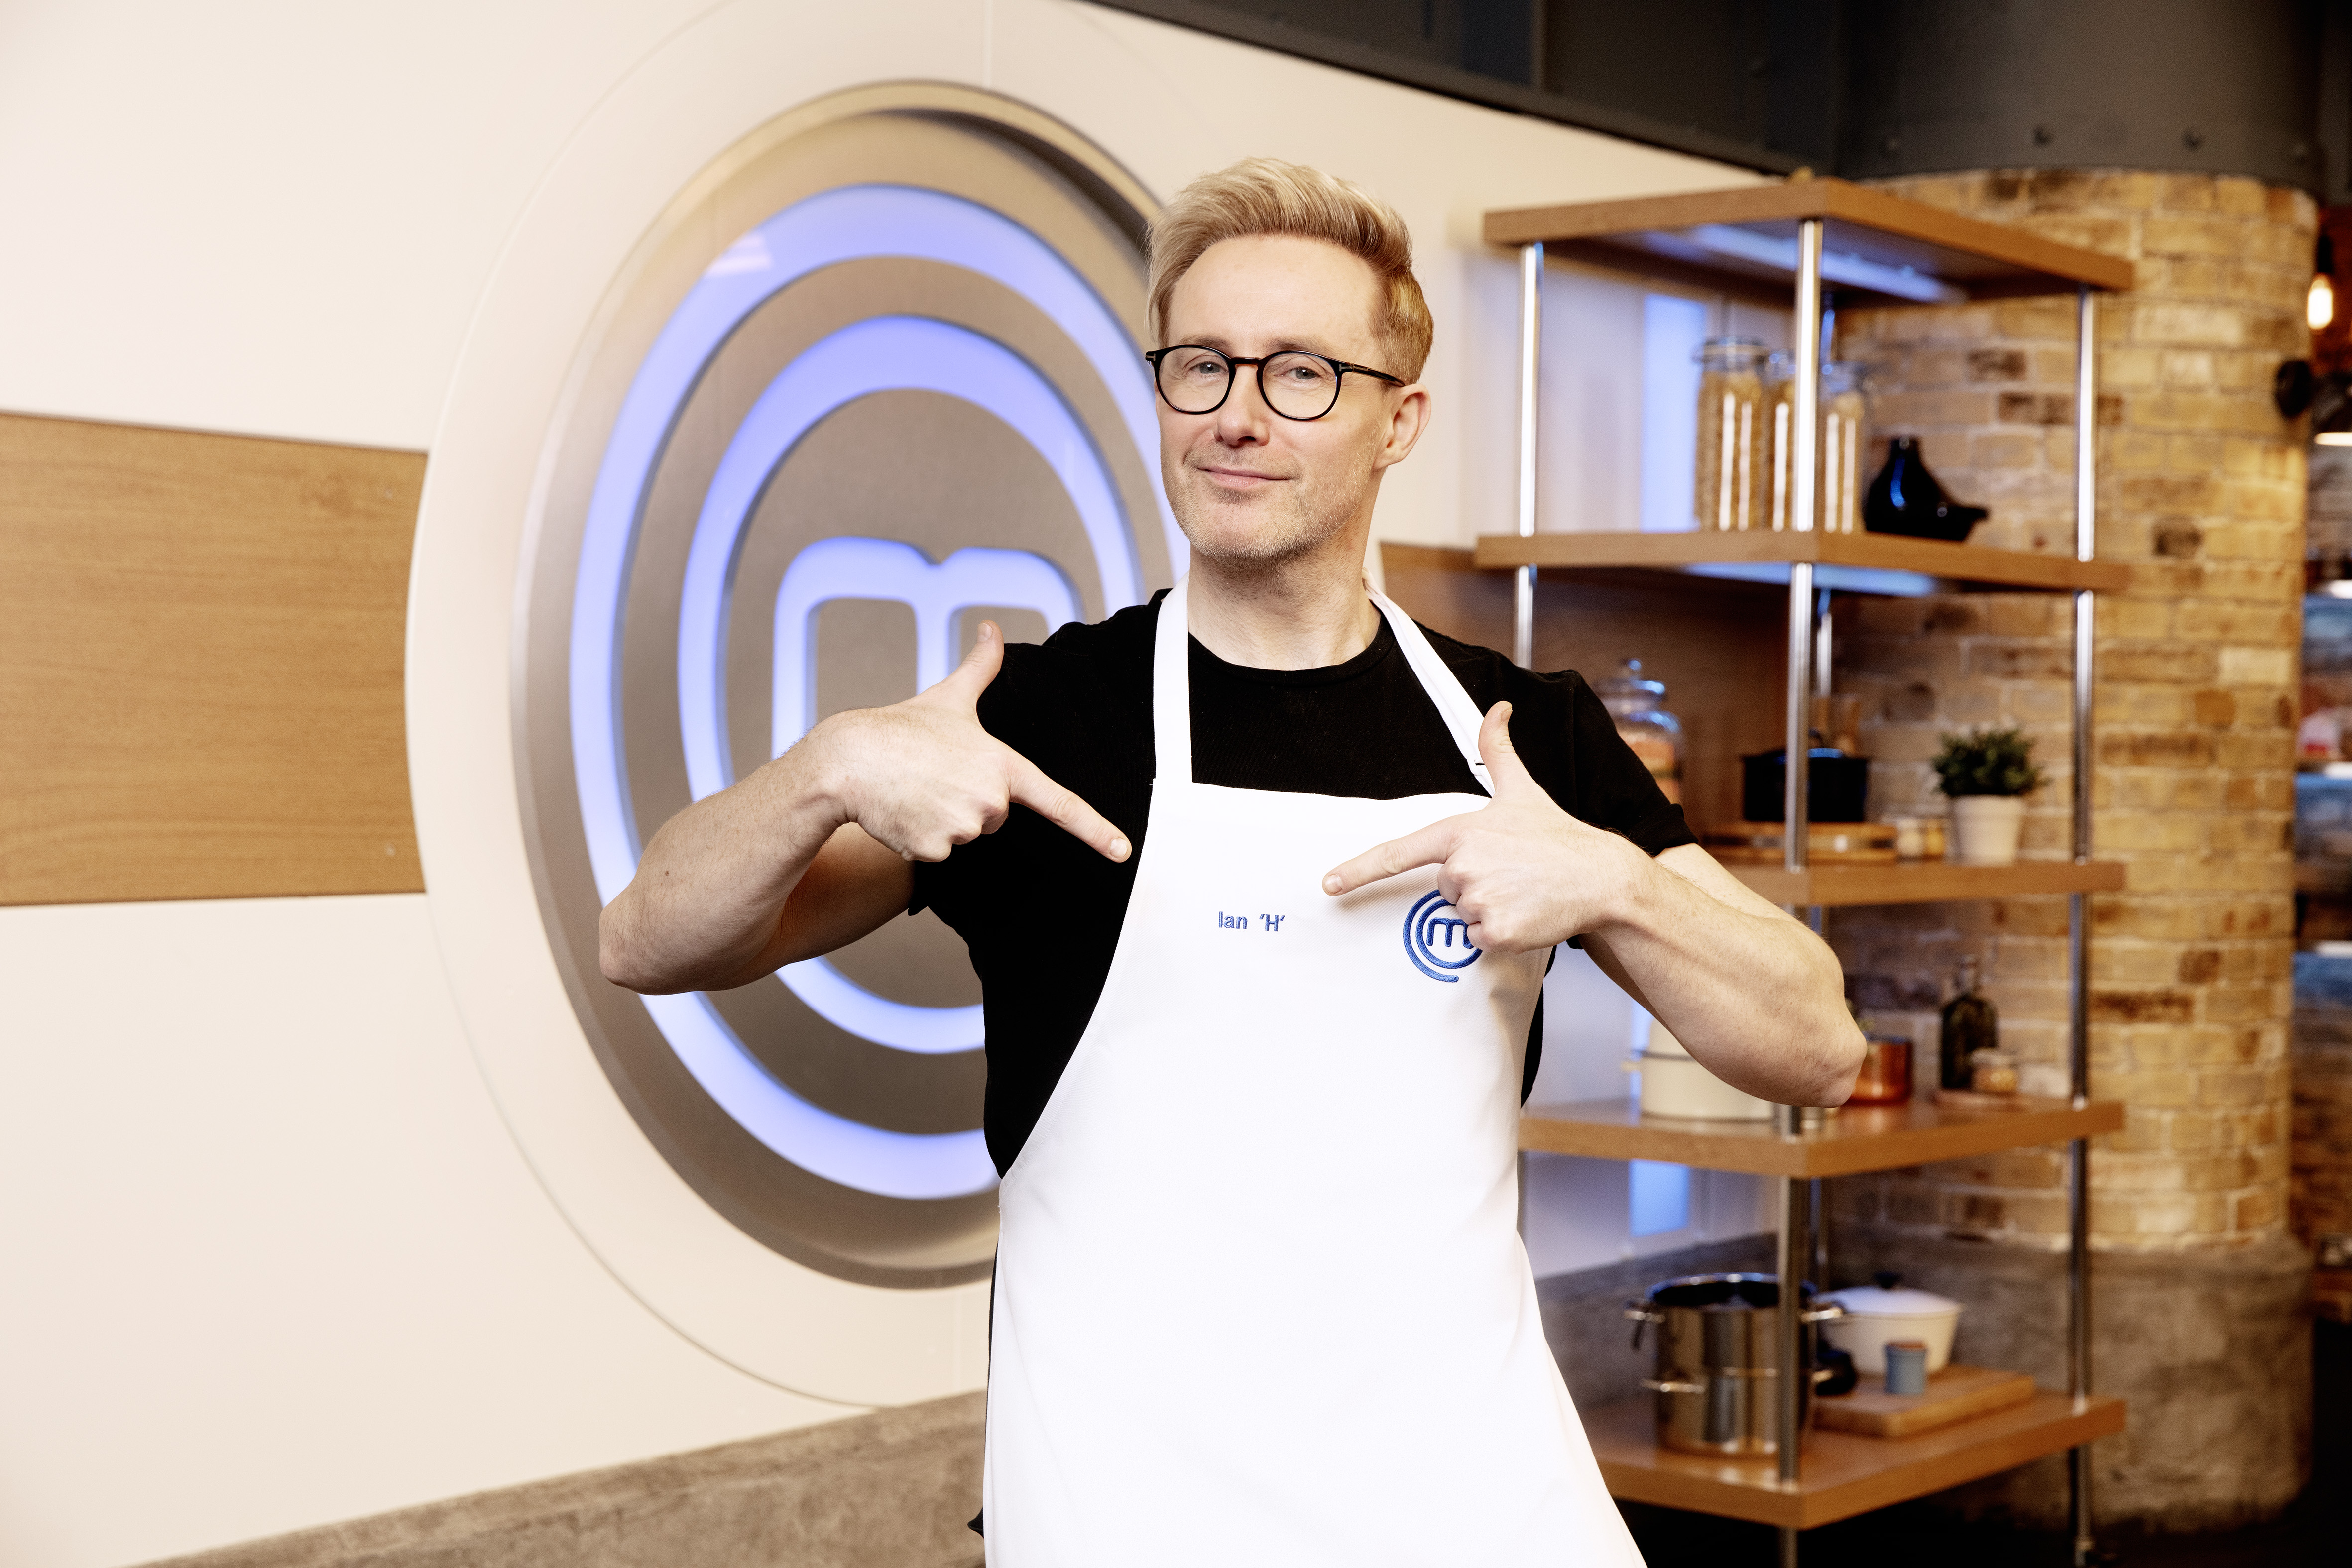 H from Steps points at his printed name of the MasterChef Celebrity apron